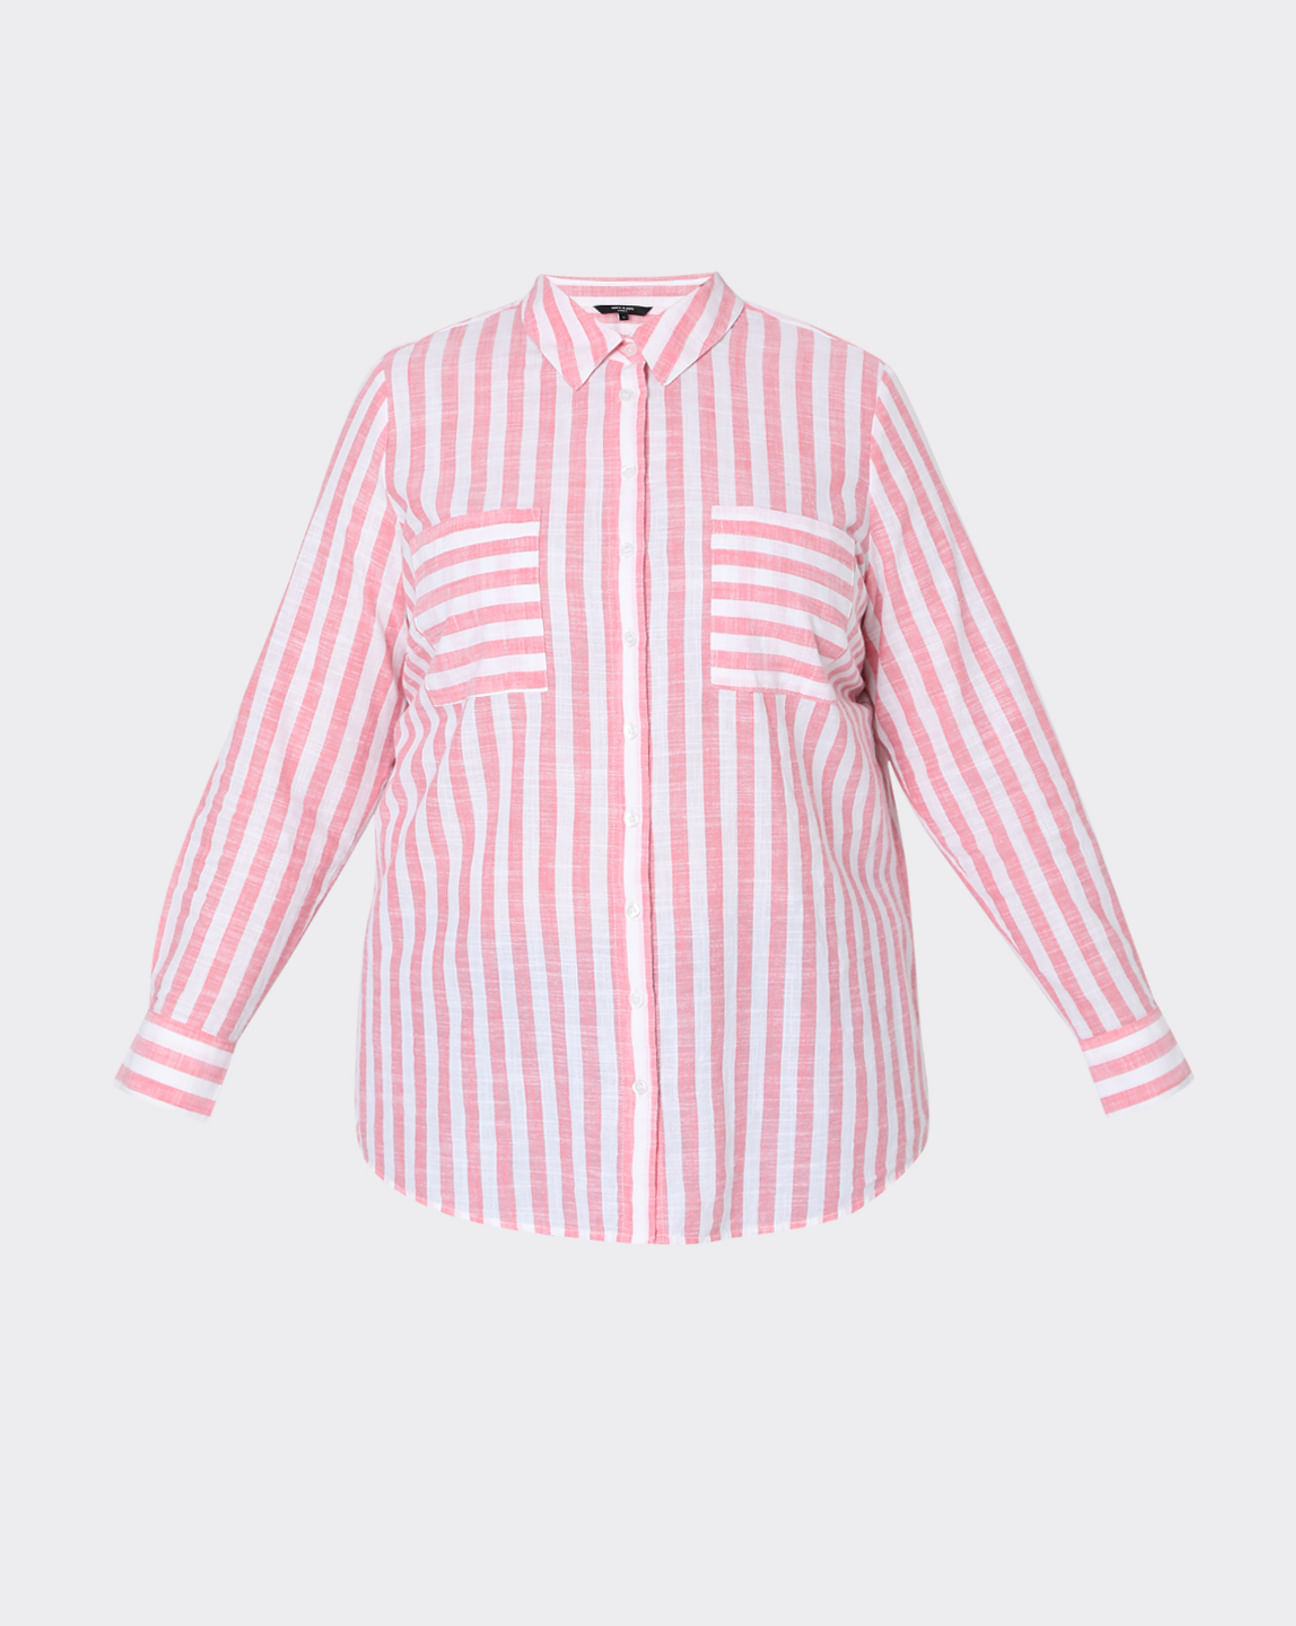 What's happening to the striped shirts?